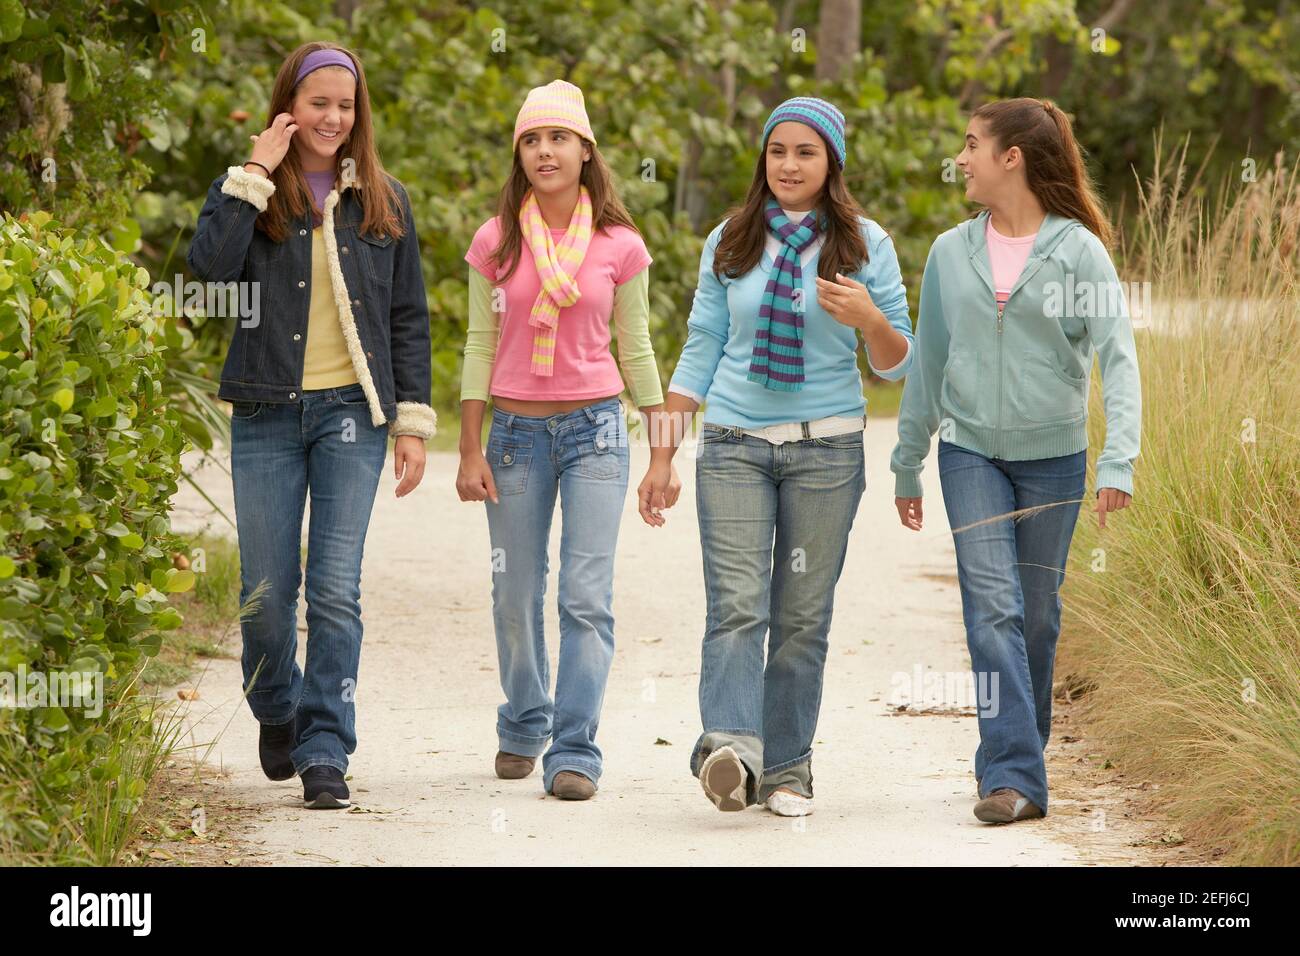 Girl walking with her friends Stock Photo